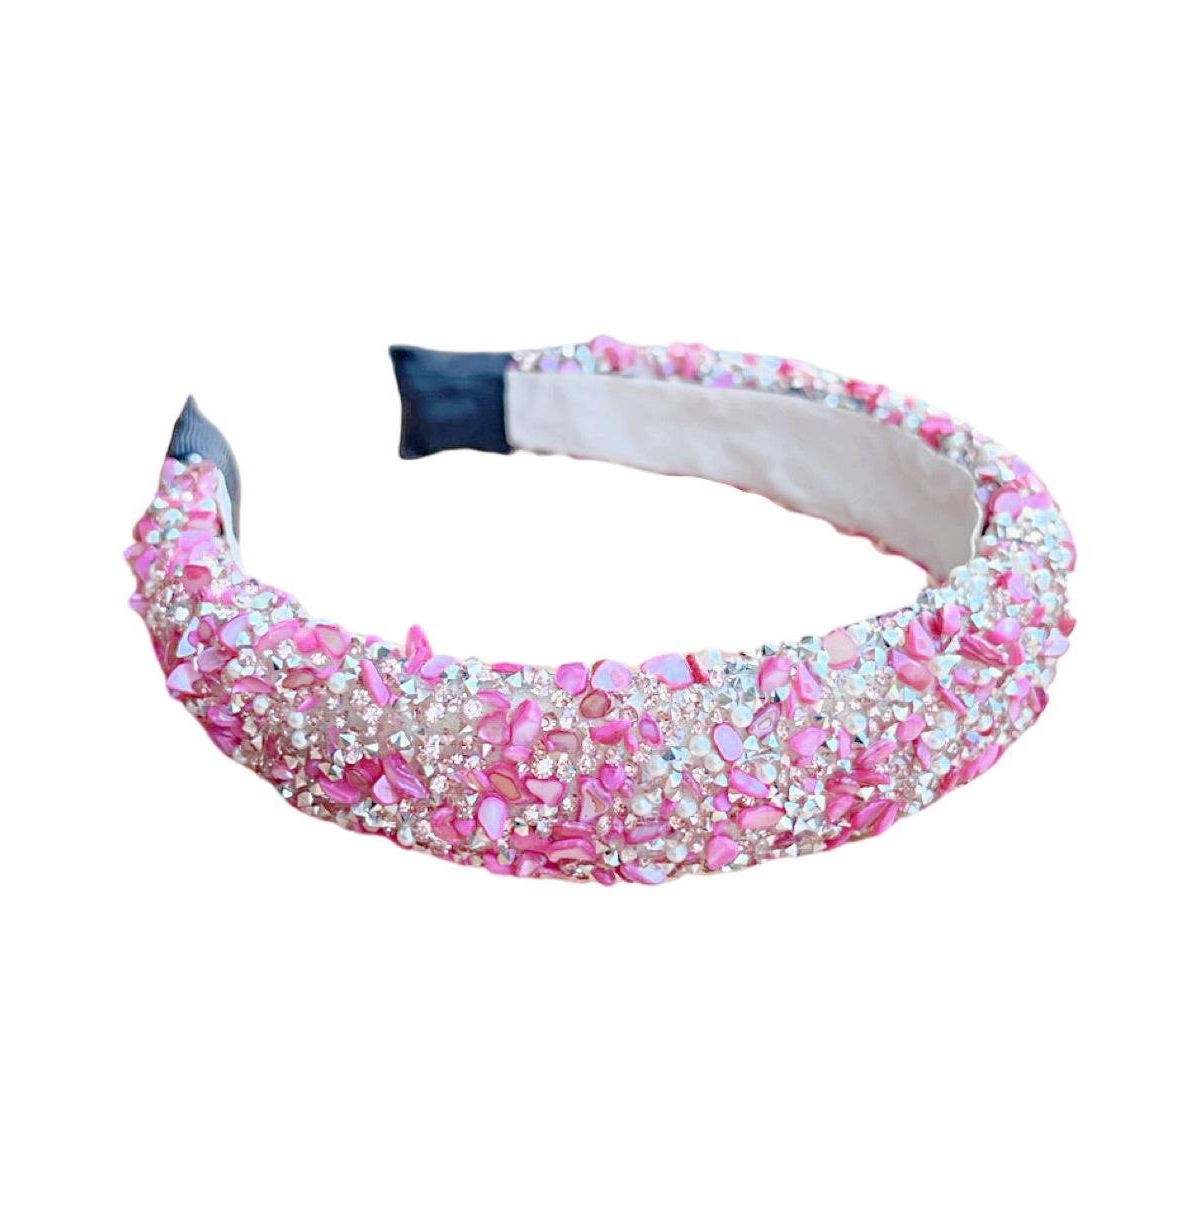 Women's All That Glitters Headband - Pink + Silver - Pink + silver